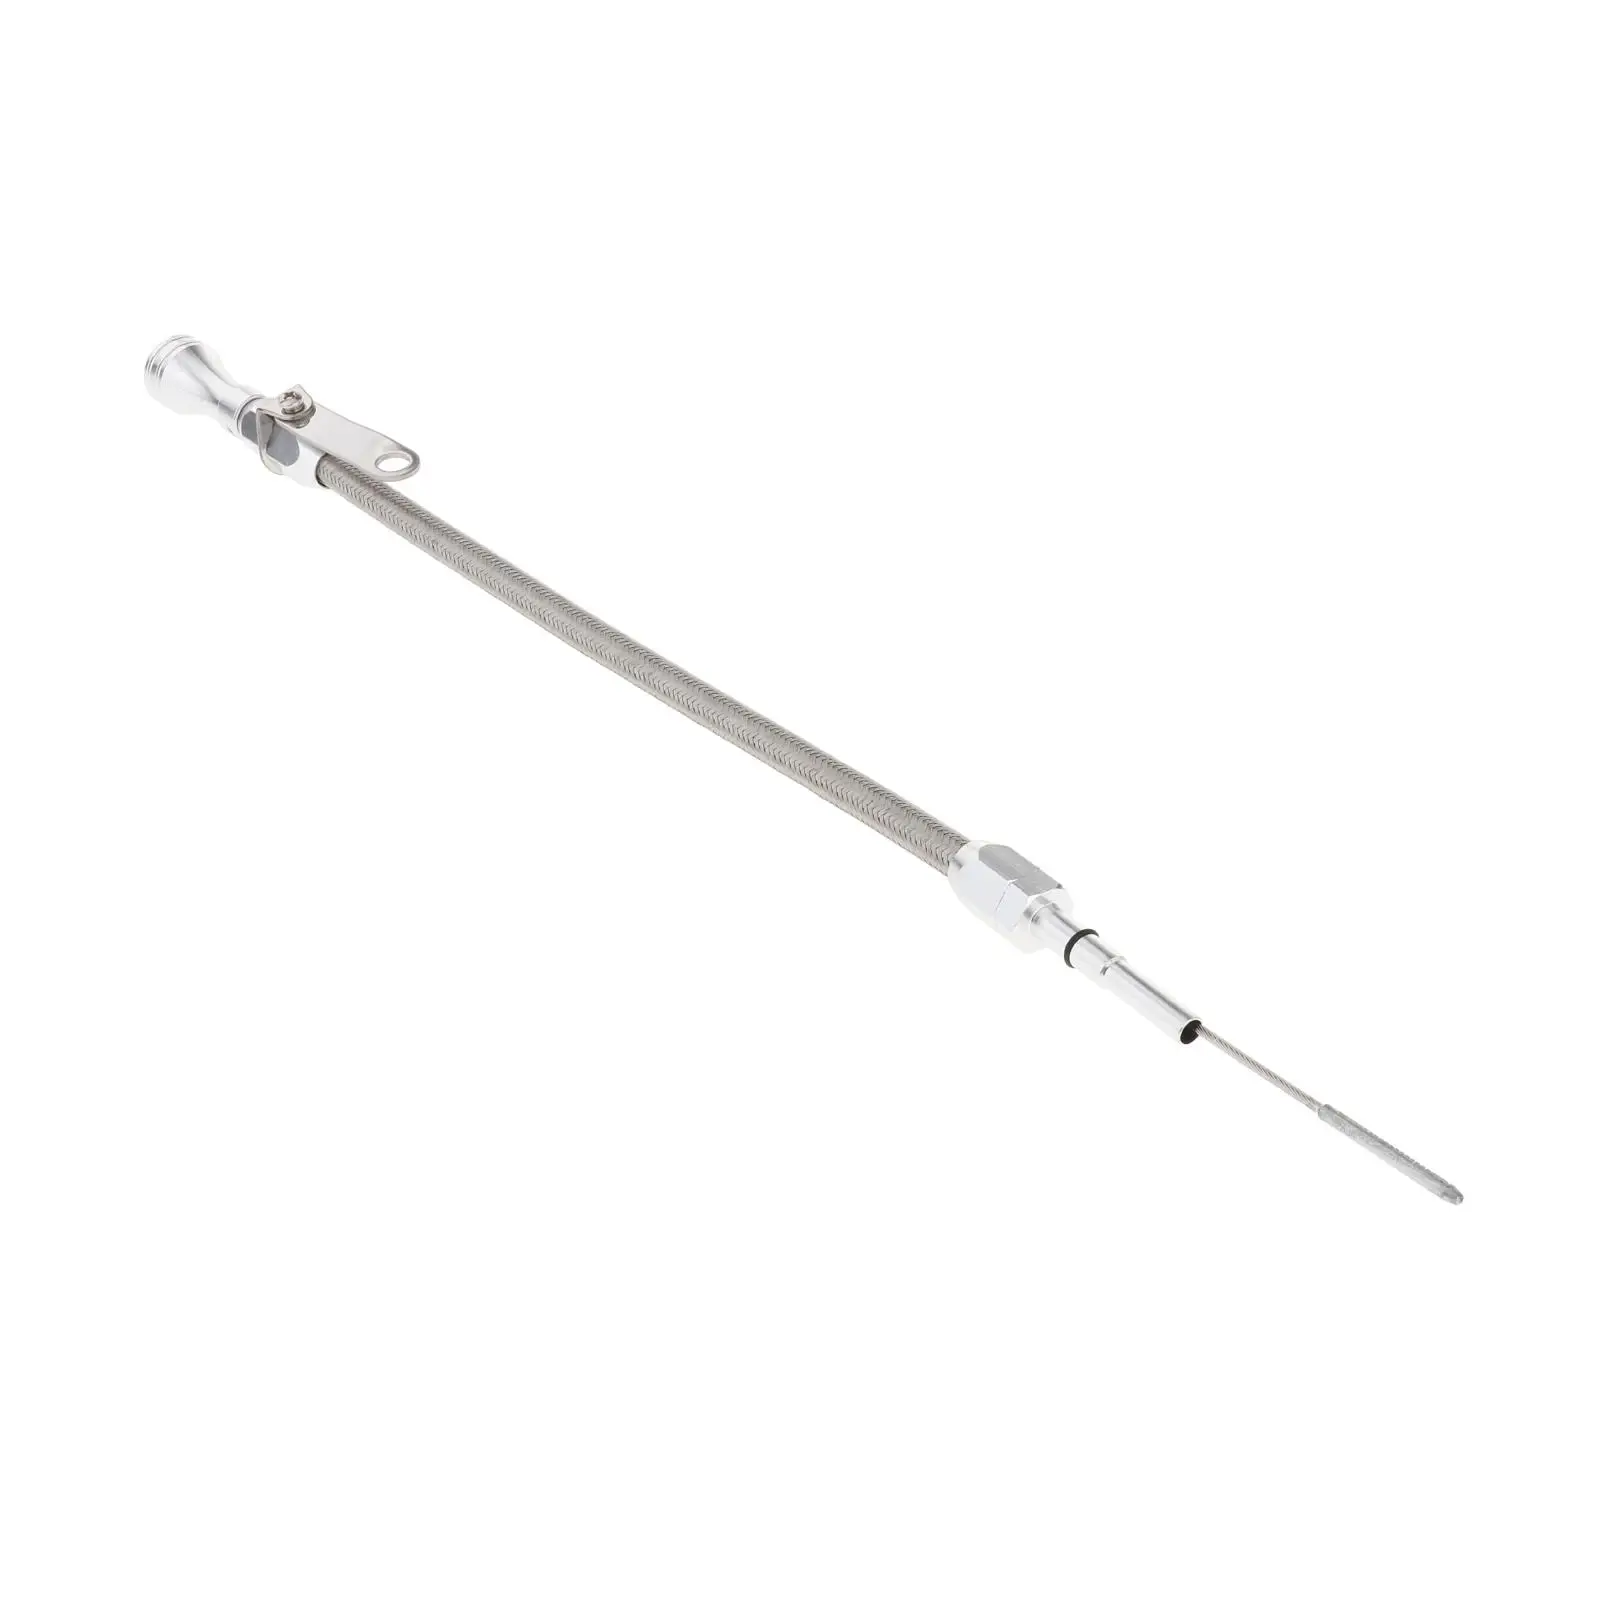 Stainless Steel Dipstick for LS Engines LS1 LS6 LM7 L59 L98 L76 for  5300 Automobile Accessories Easy installation